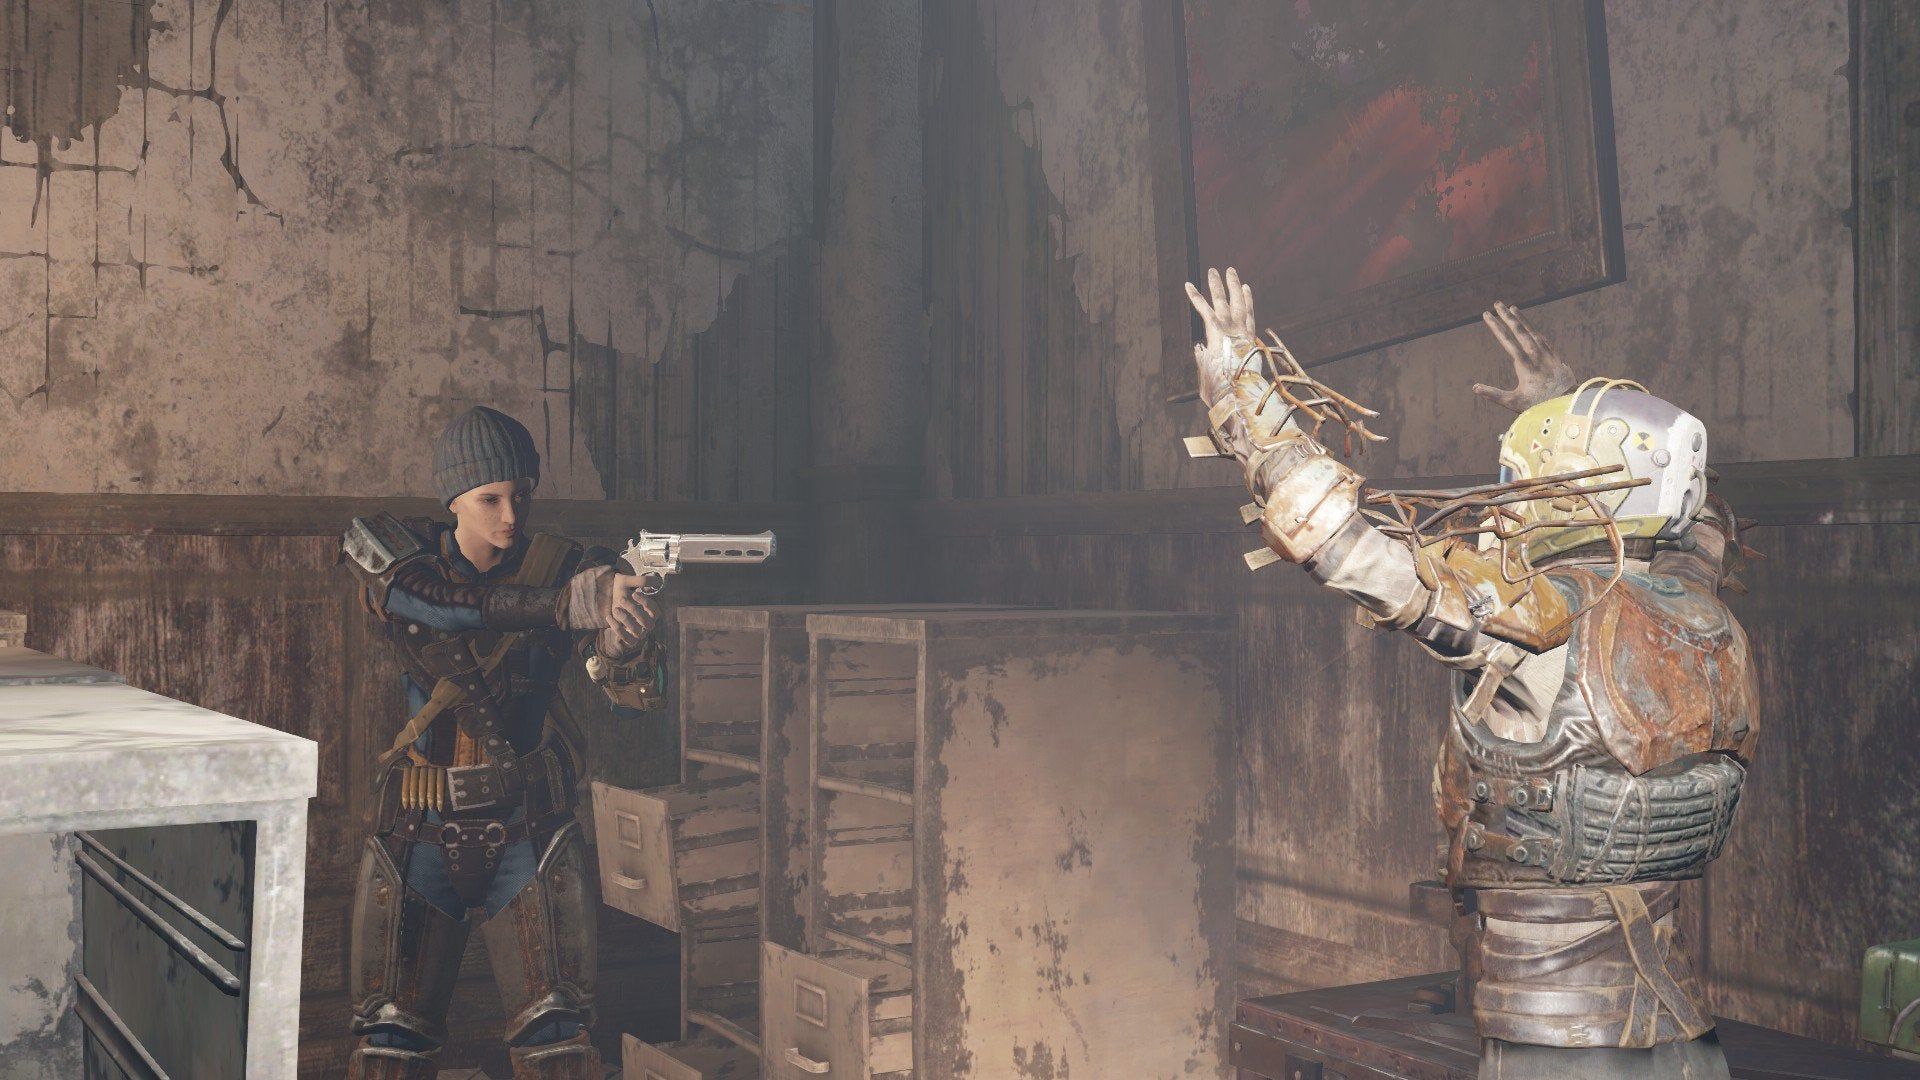 A character pointing a gun at another character, who is holding their hands in the air.